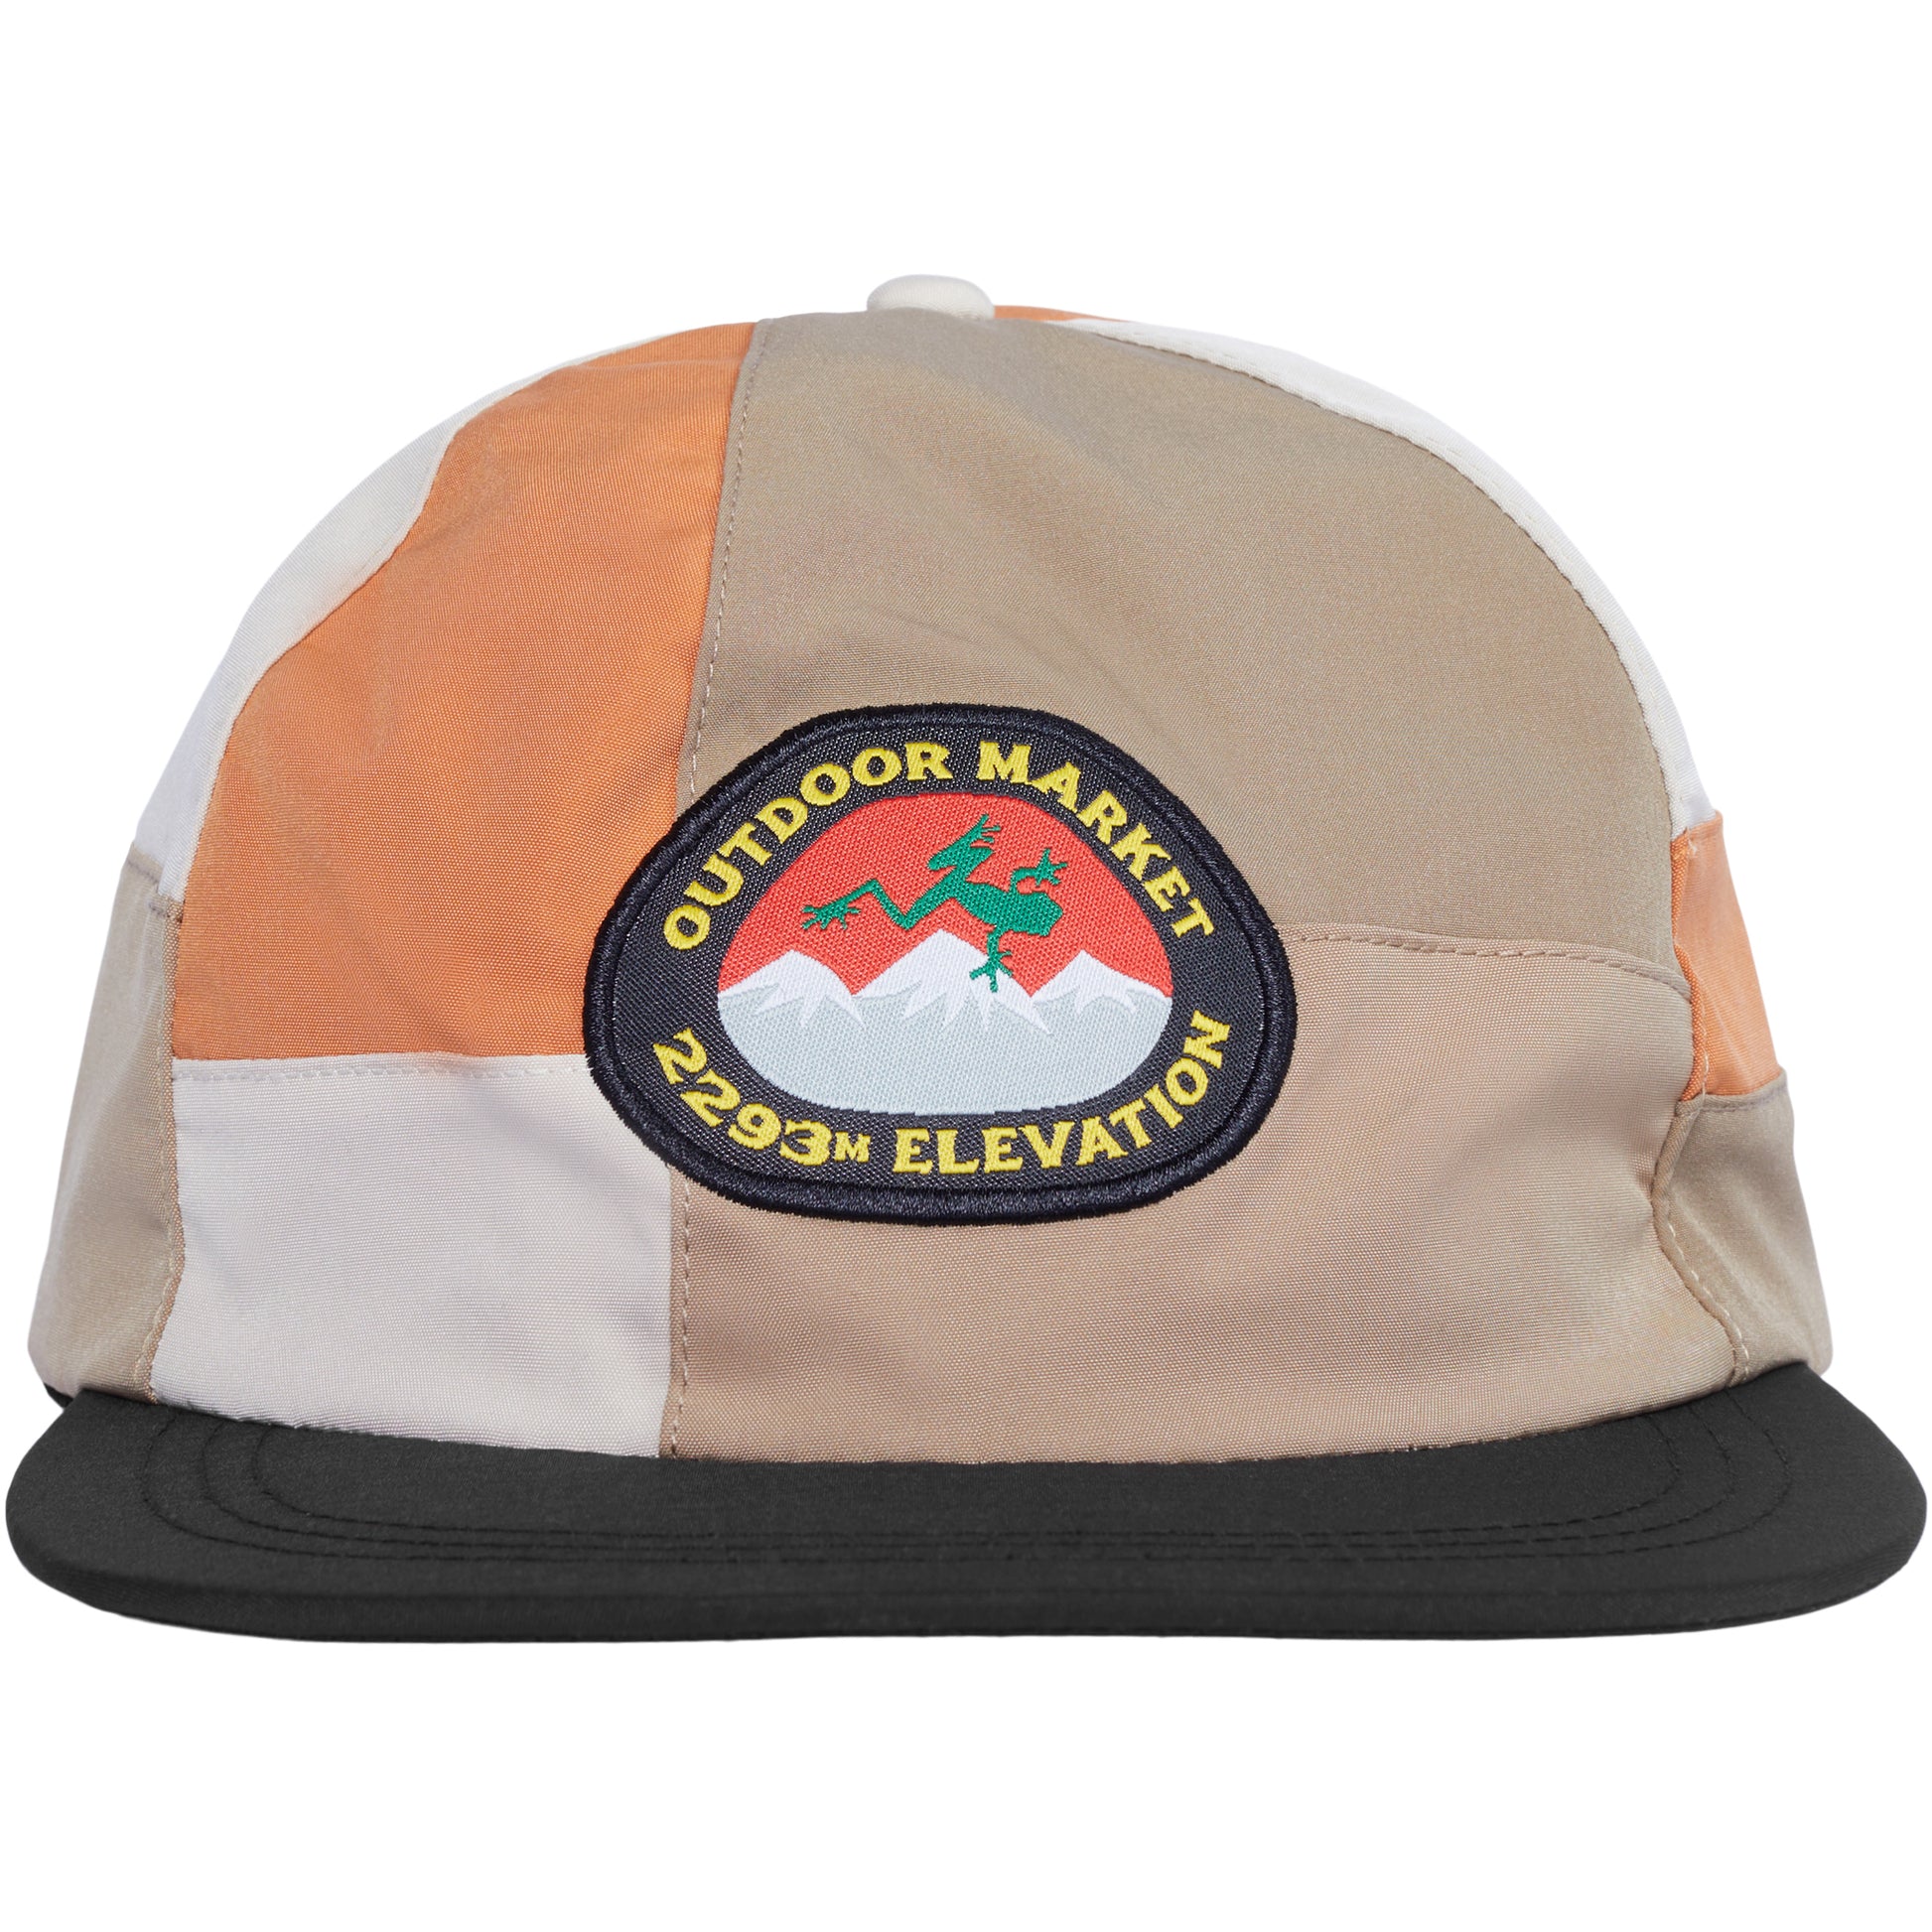 MARKET GORP PATCHWORK 6 PANEL TECH HAT - Nylon 6-Panel Hat With A Bungie Cord Enclosure With Embroidered Patch On Front & Direct Embroidery On Back